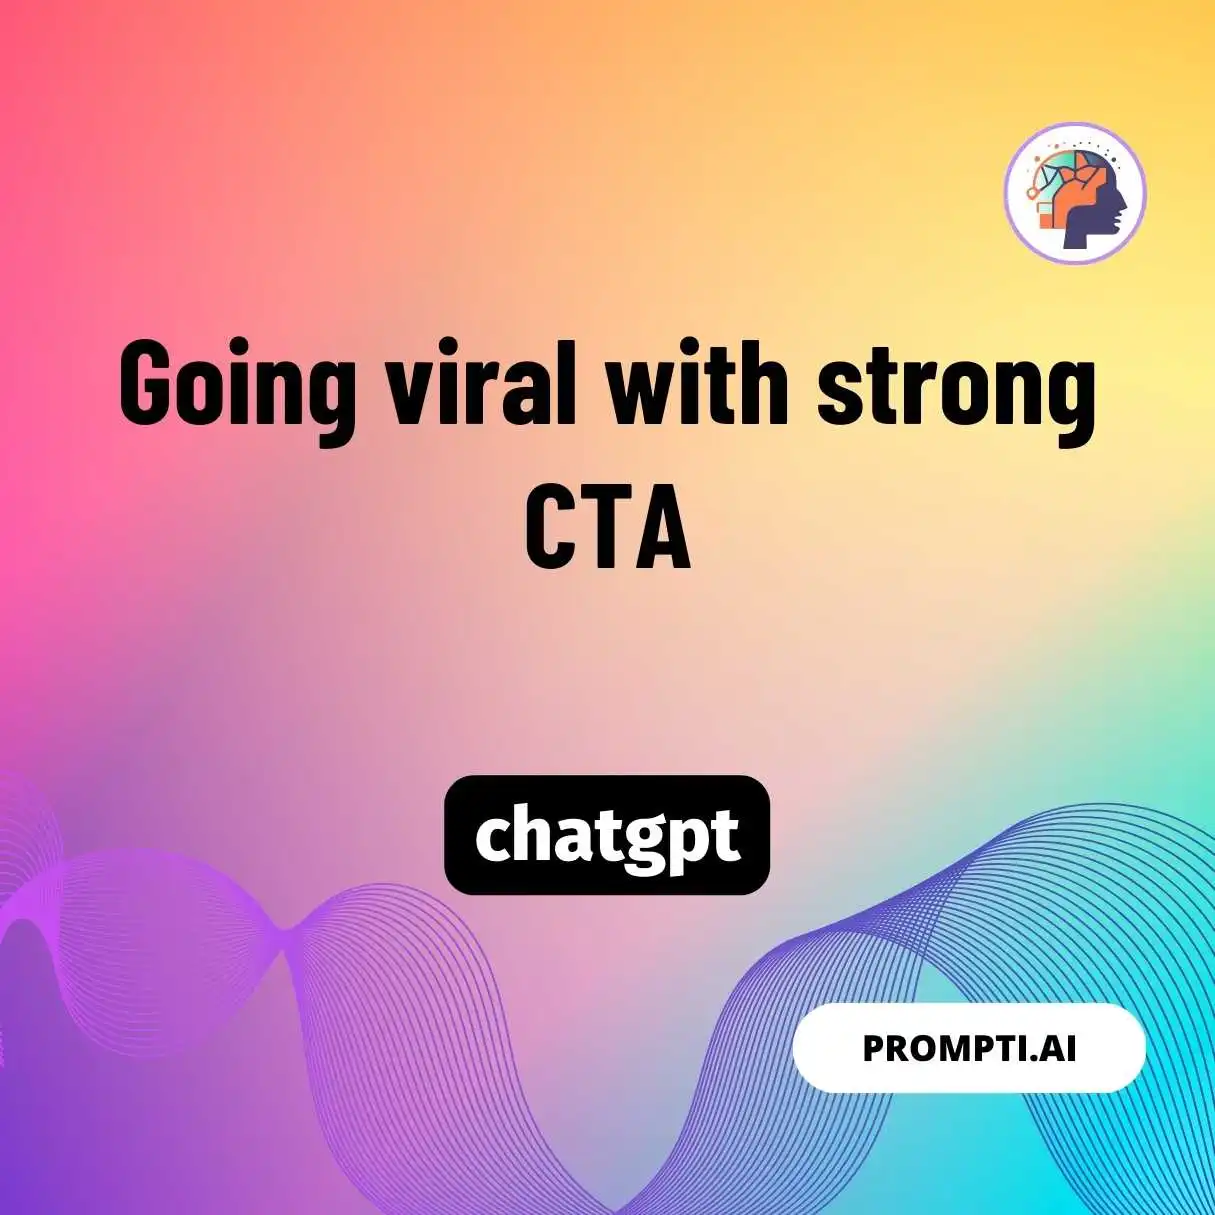 Going viral with strong CTA